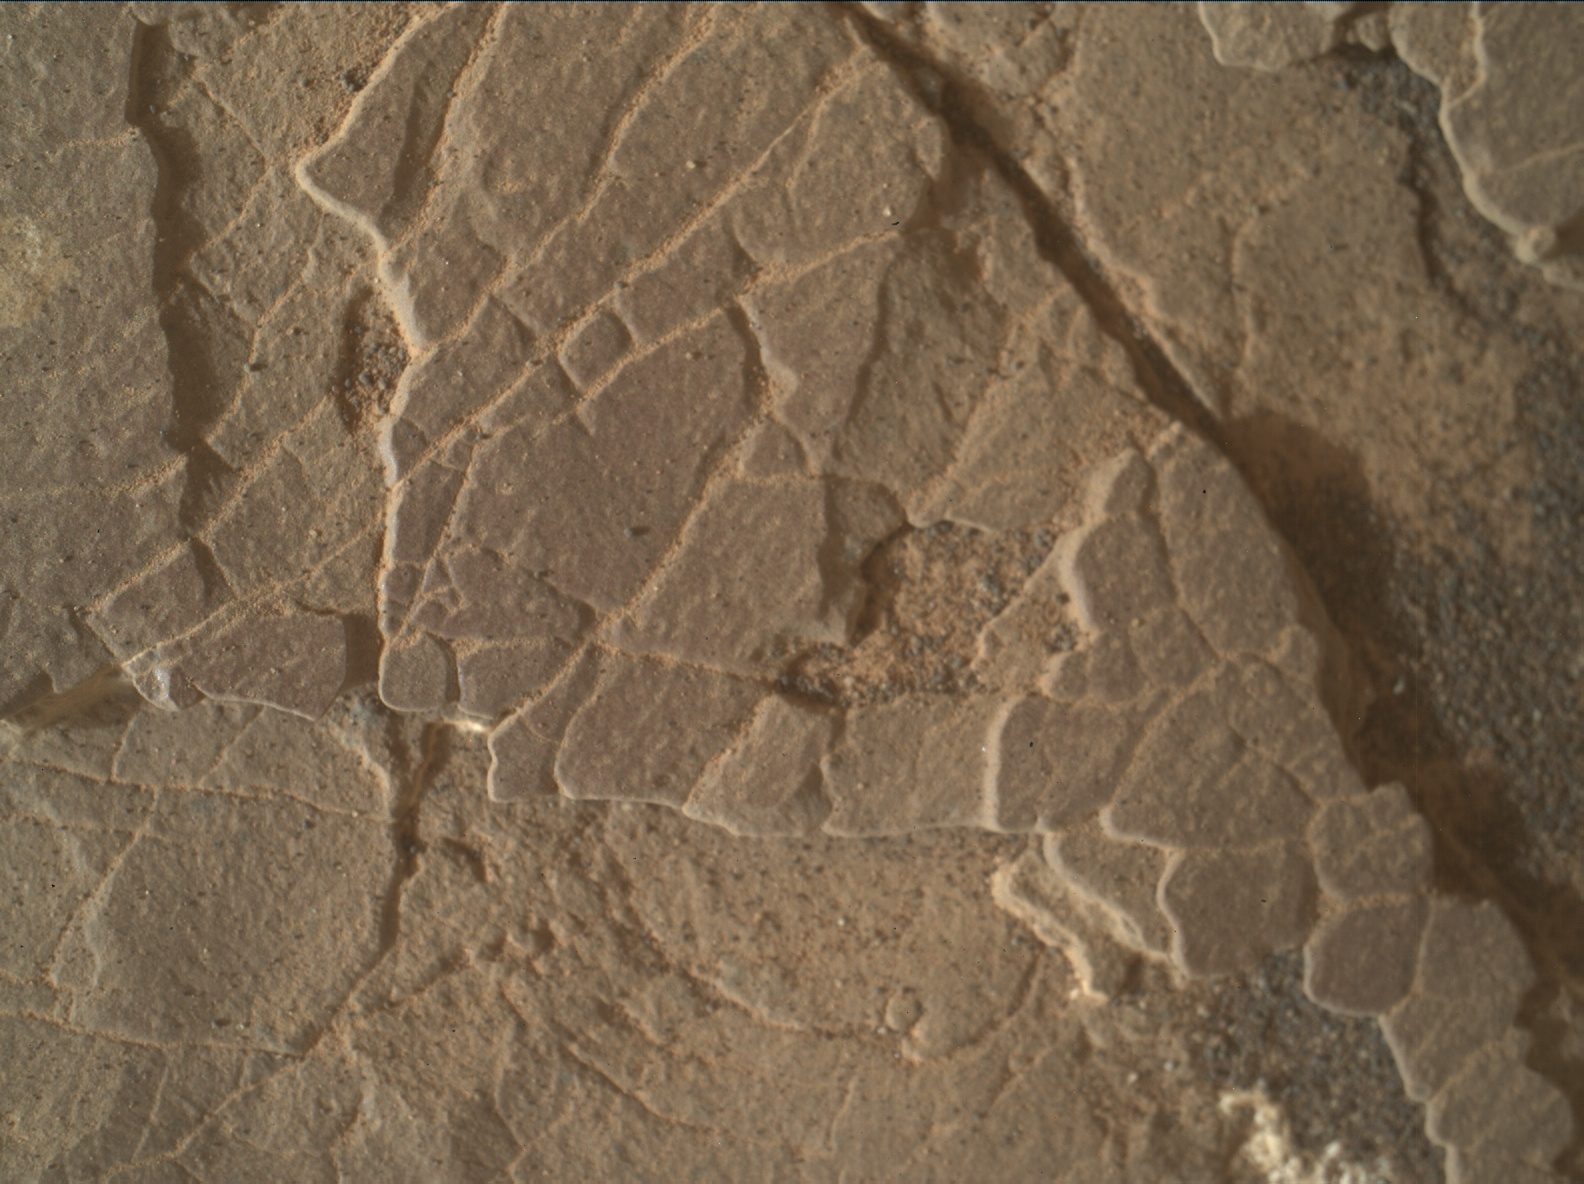 Nasa's Mars rover Curiosity acquired this image using its Mars Hand Lens Imager (MAHLI) on Sol 2935